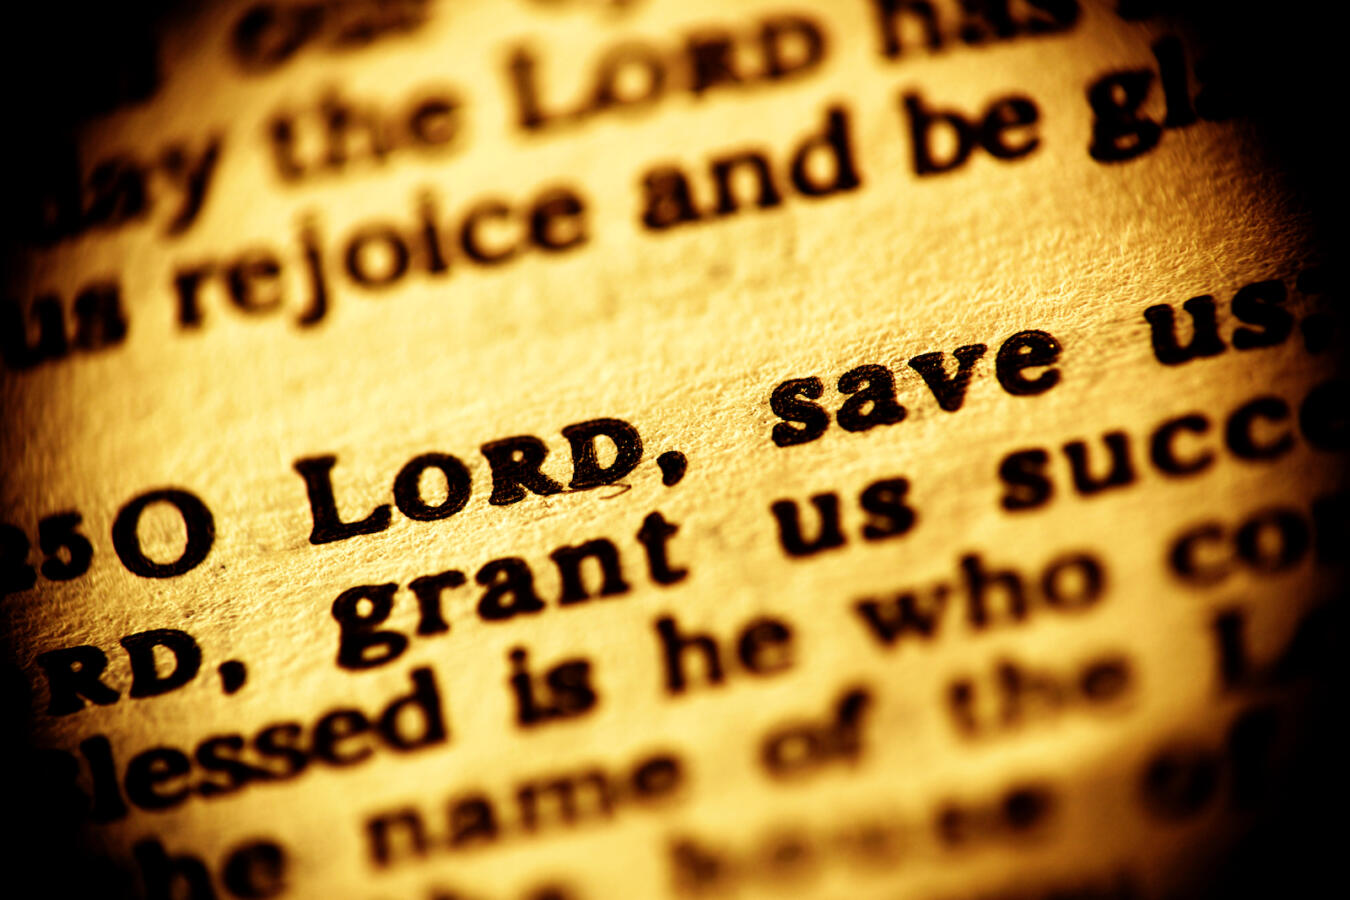 Lord save us (Psalm 118,25)